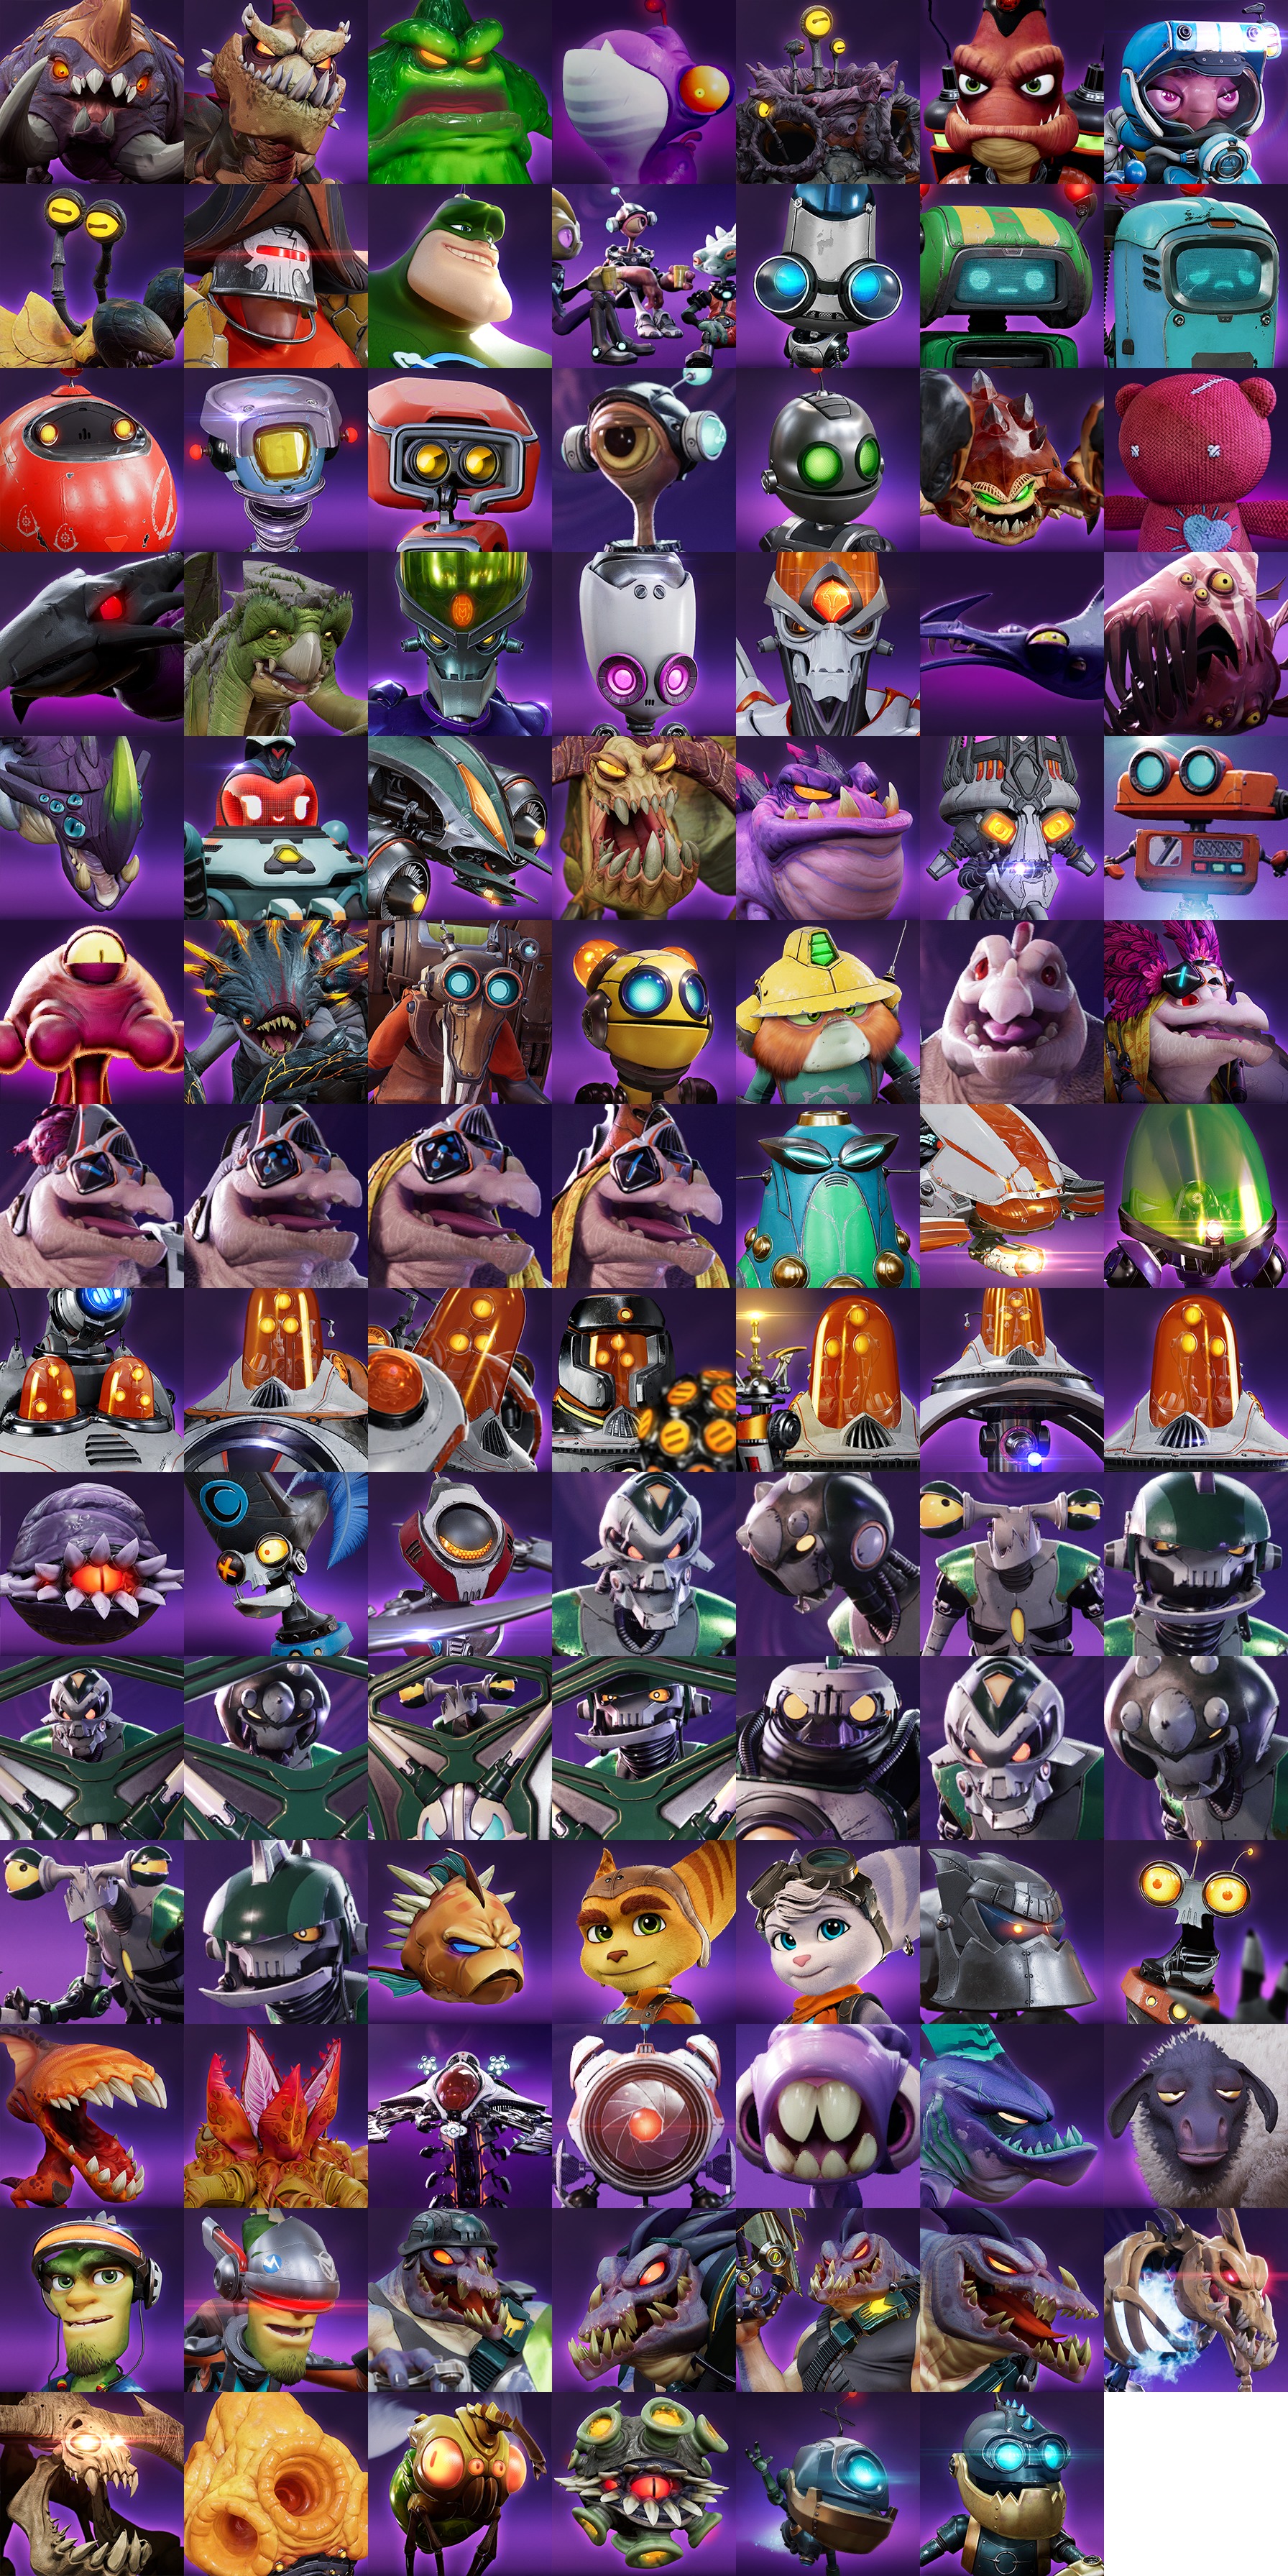 Ratchet & Clank: Rift Apart - Gallery Icons